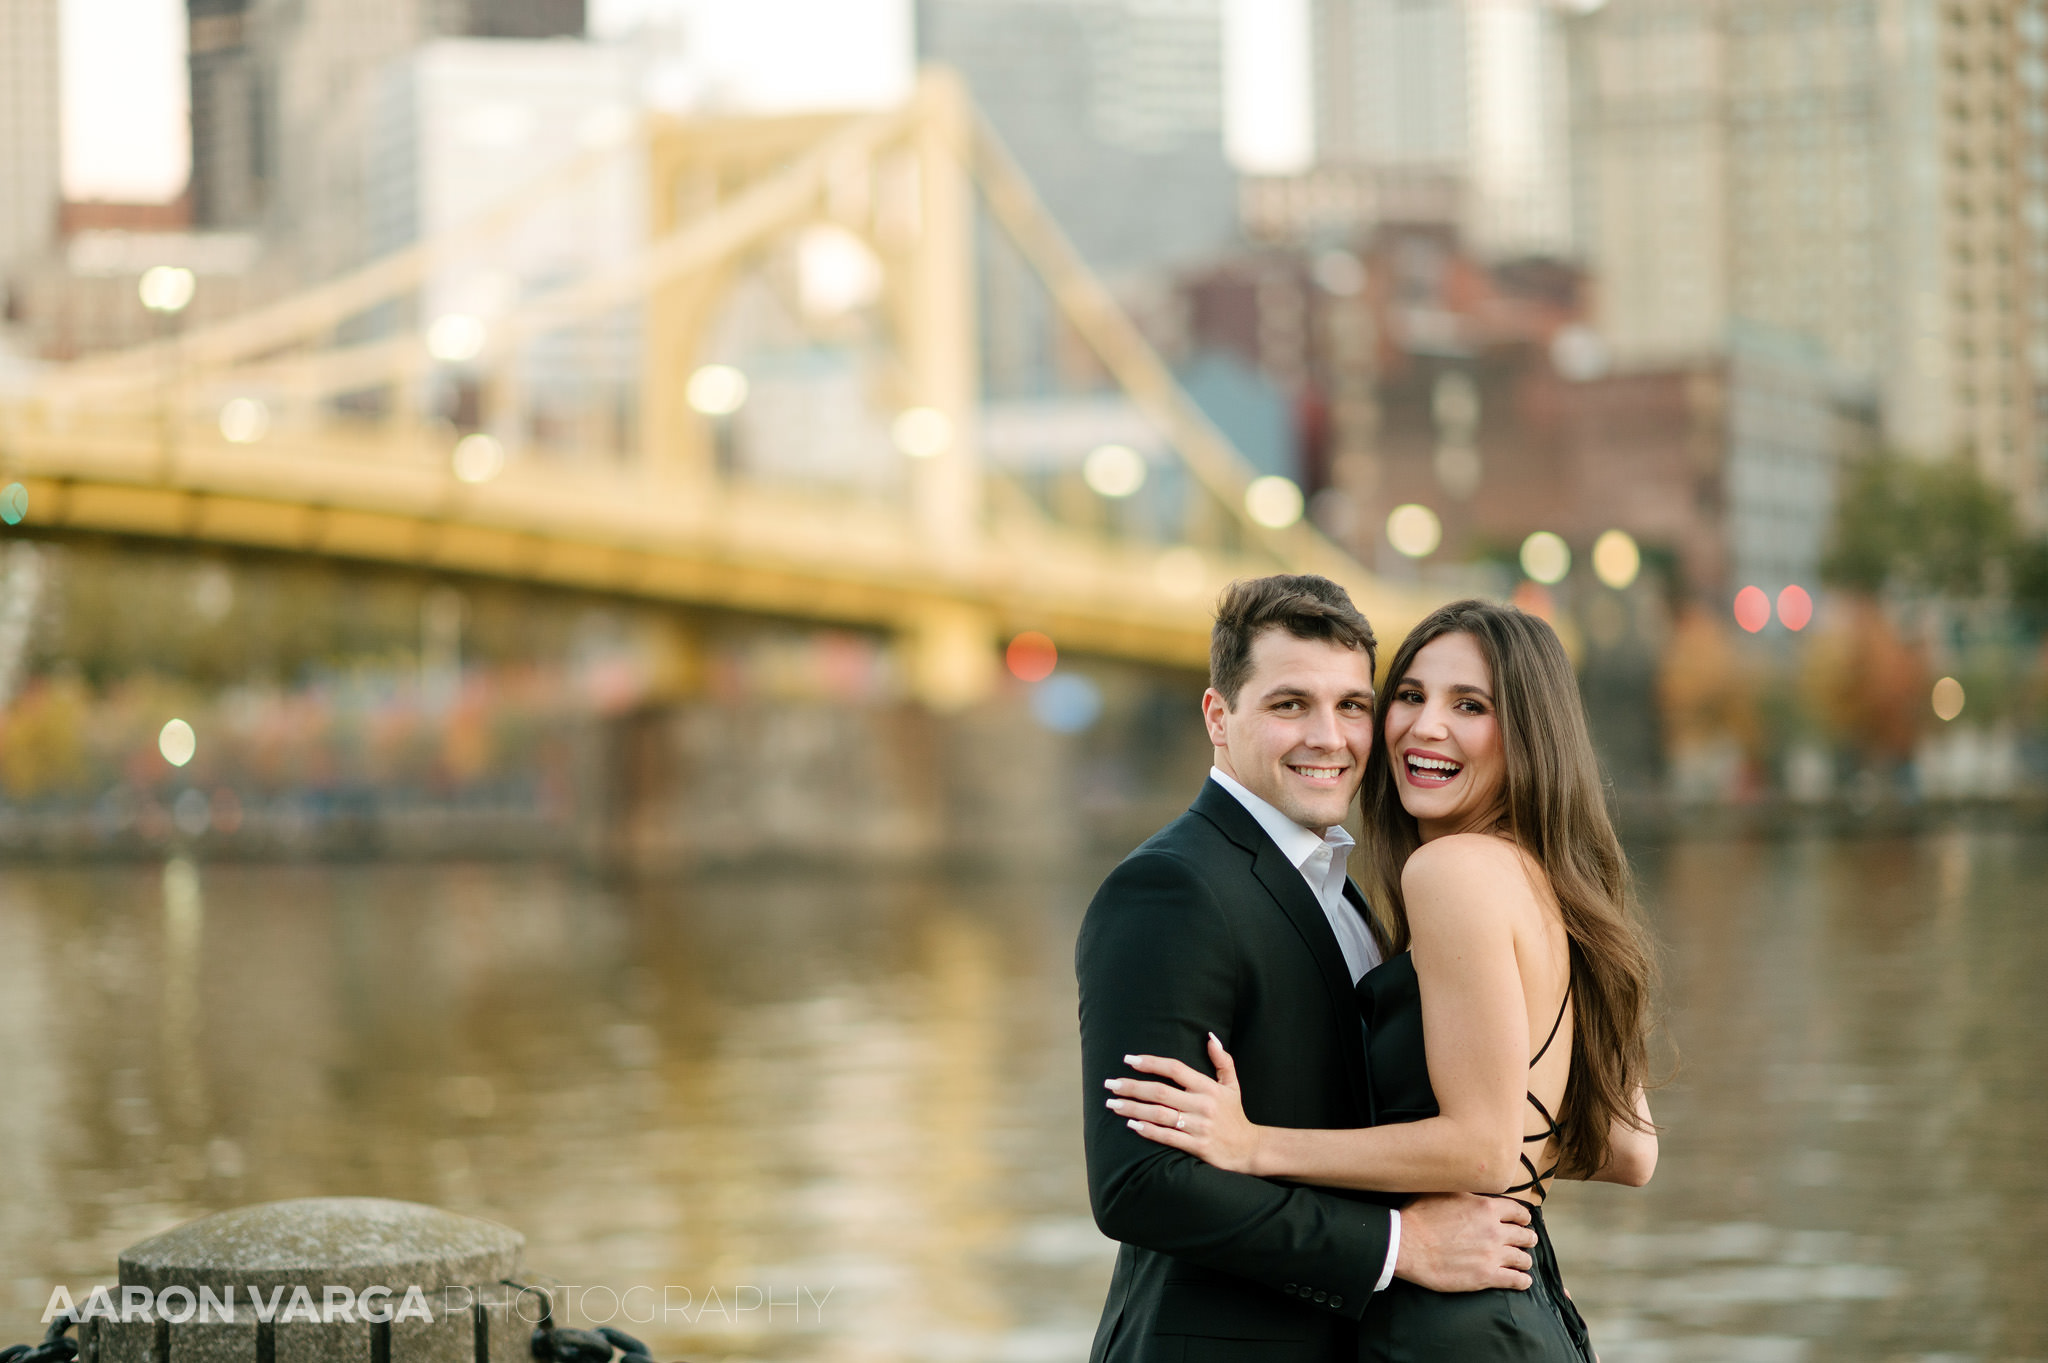 21 engagement session pittsburgh north shore - Meredith + LJ | Downtown Pittsburgh and North Shore Engagement Photos